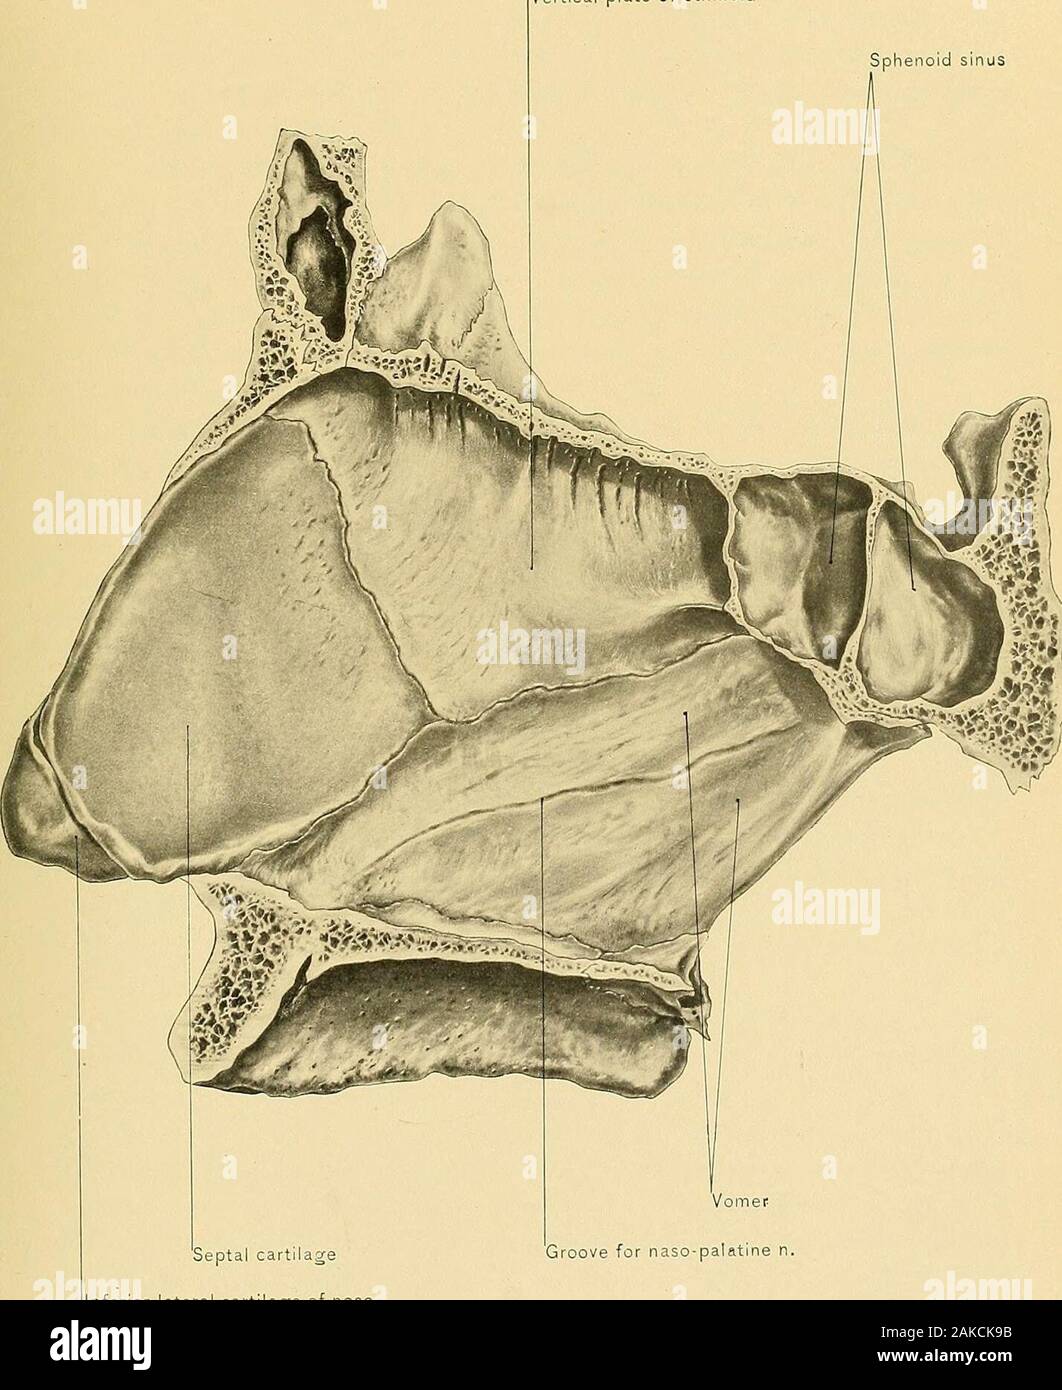 Surgical anatomy : a treatise on human anatomy in its application to the practice of medicine and surgery . ateral cartilage Fibrous tissue of ala of nose Anterior nasal spineof superior maxilla CARTILAGES AT BASE OF NOSE,290 PLATE CCXX. Vertical plate of ethmoid Sphenoid sinus. Septal cartilageInferior lateral cartilage of nose VomerGroove for naso-palatine n. NASAL SEPTUM,291 THE NOSE. 293 is attached to the superior lateral cartilage and the superior maxilla by densefibrous tissue, in which the sesamoid cartilages are found. Tlie margin of thealse of the nose is not formed by the inferior l Stock Photo